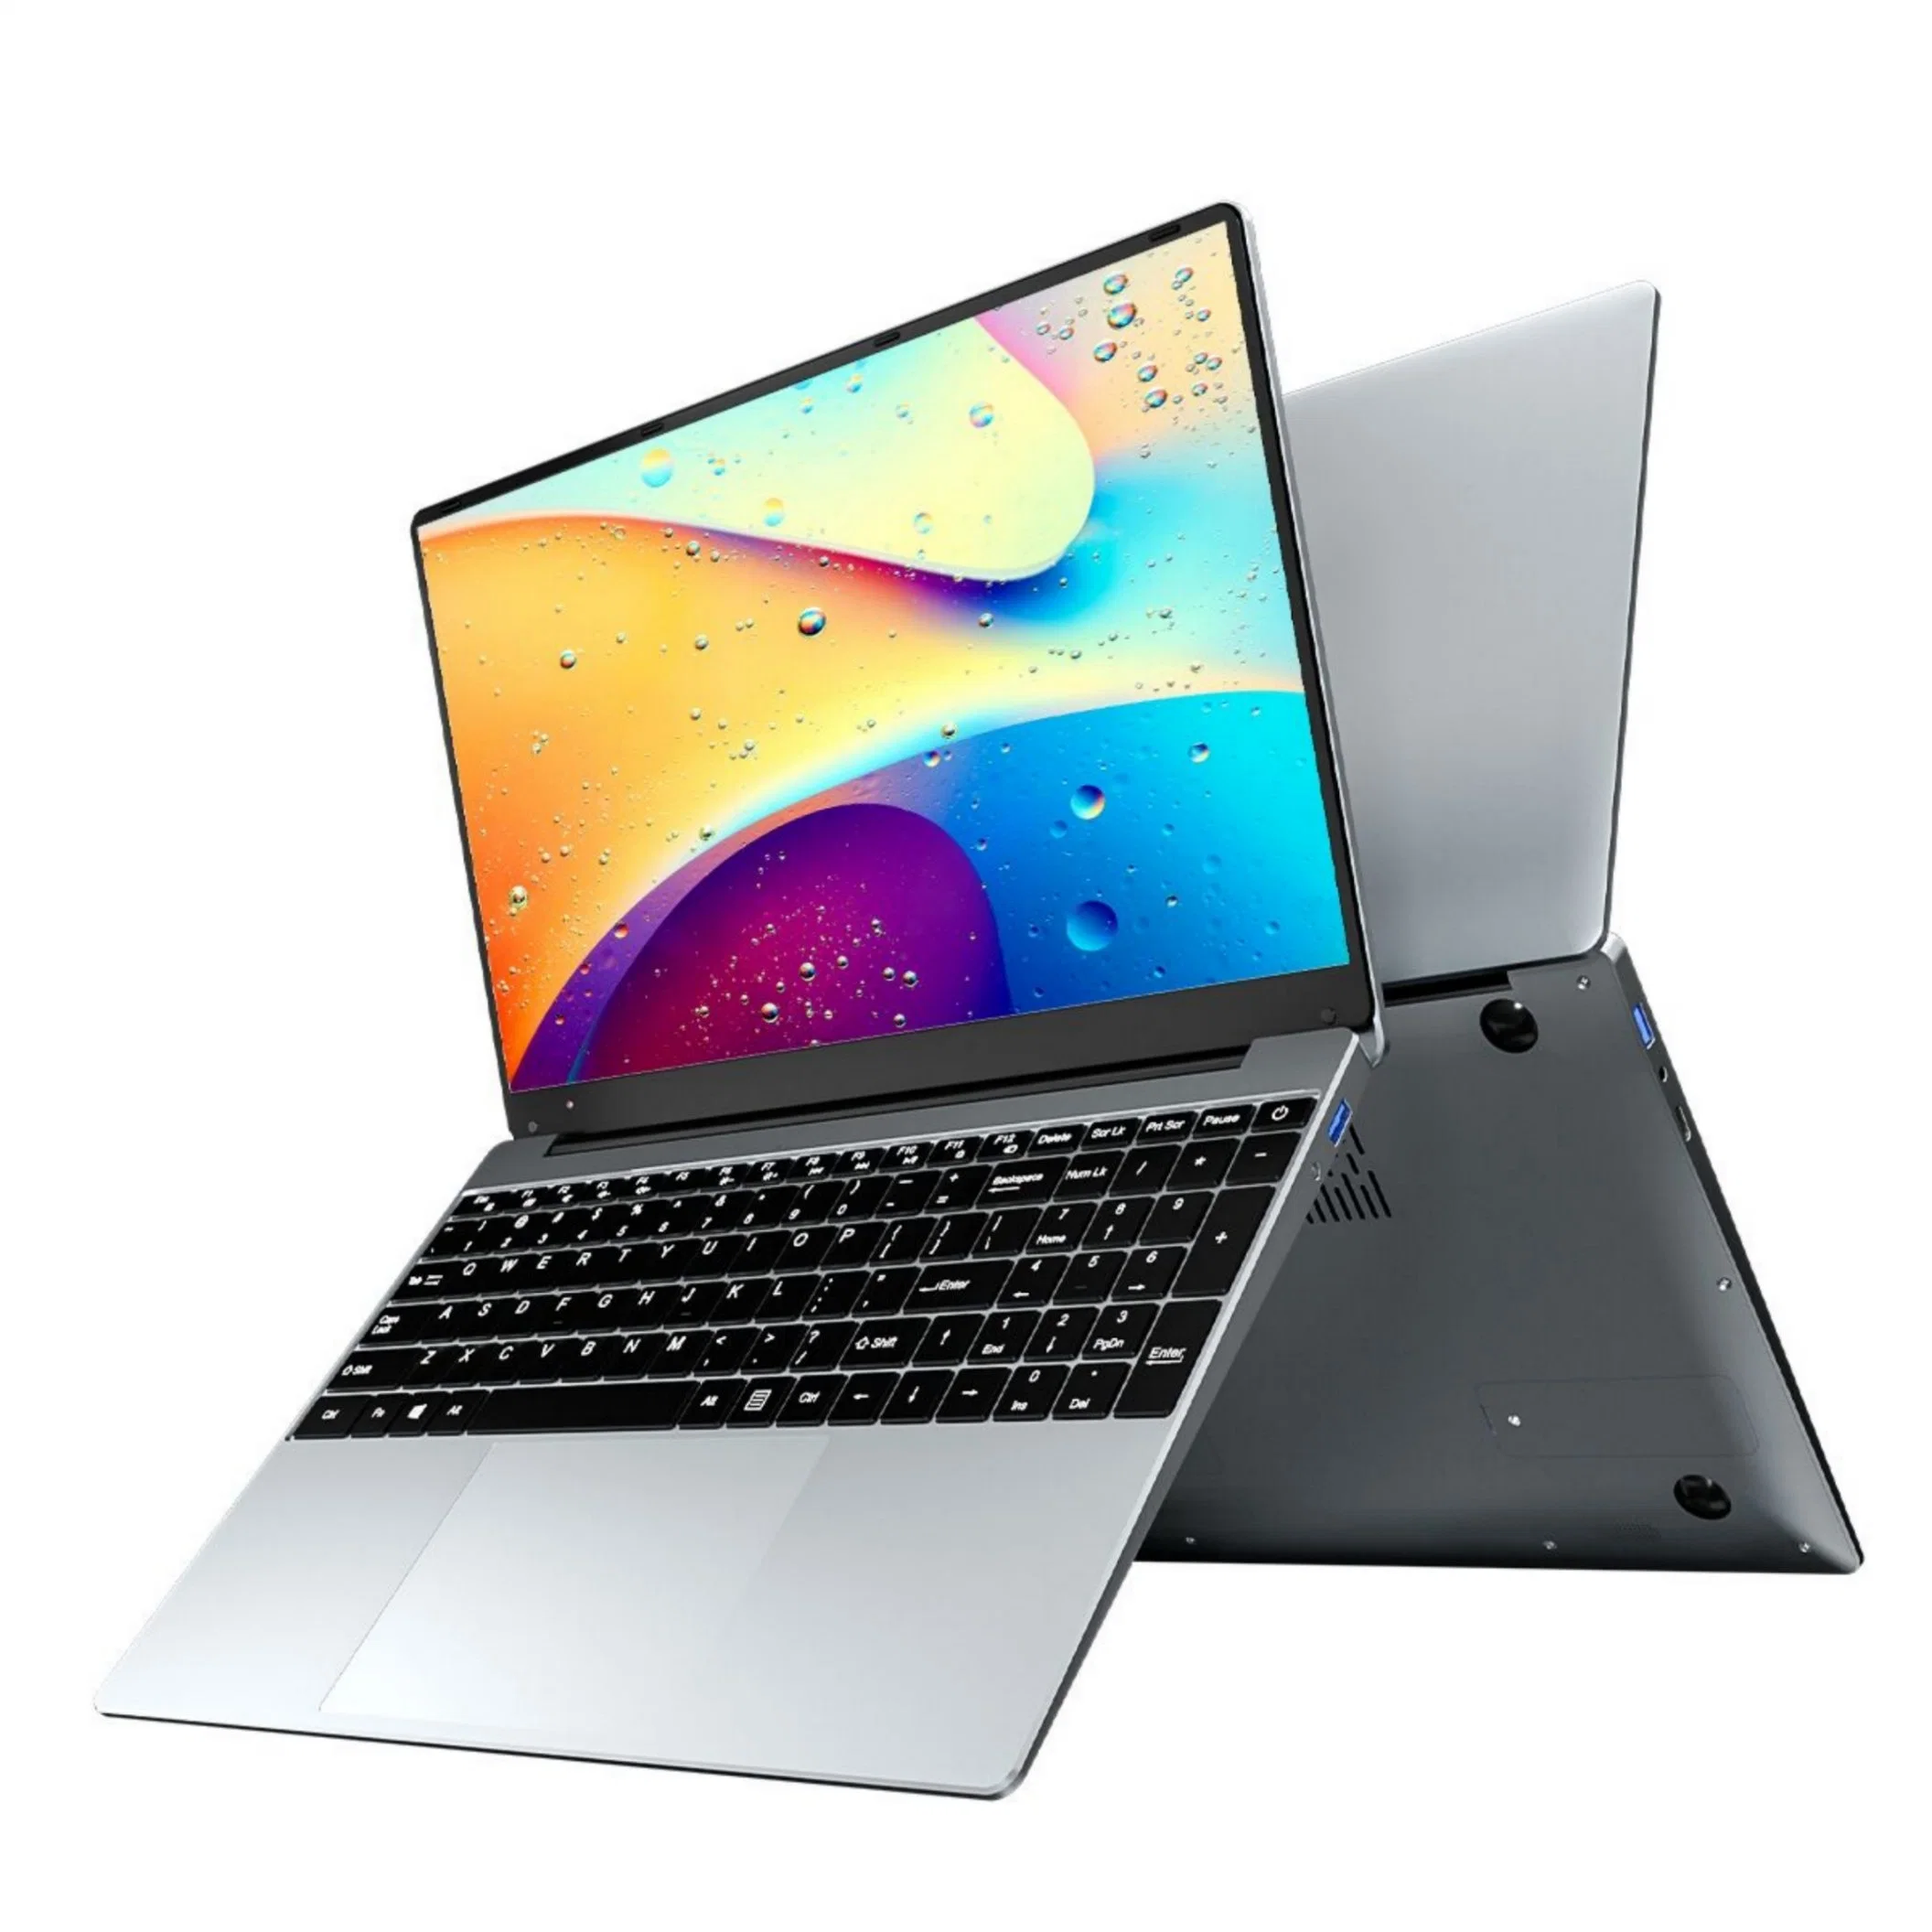 Wholesale/Supplier Bulk Low Cost Laptop 15.6 Inch IPS Screen OEM ODM New Notebook AMD R7 4700u Octa Core Cheap Price Netbook Computer PC